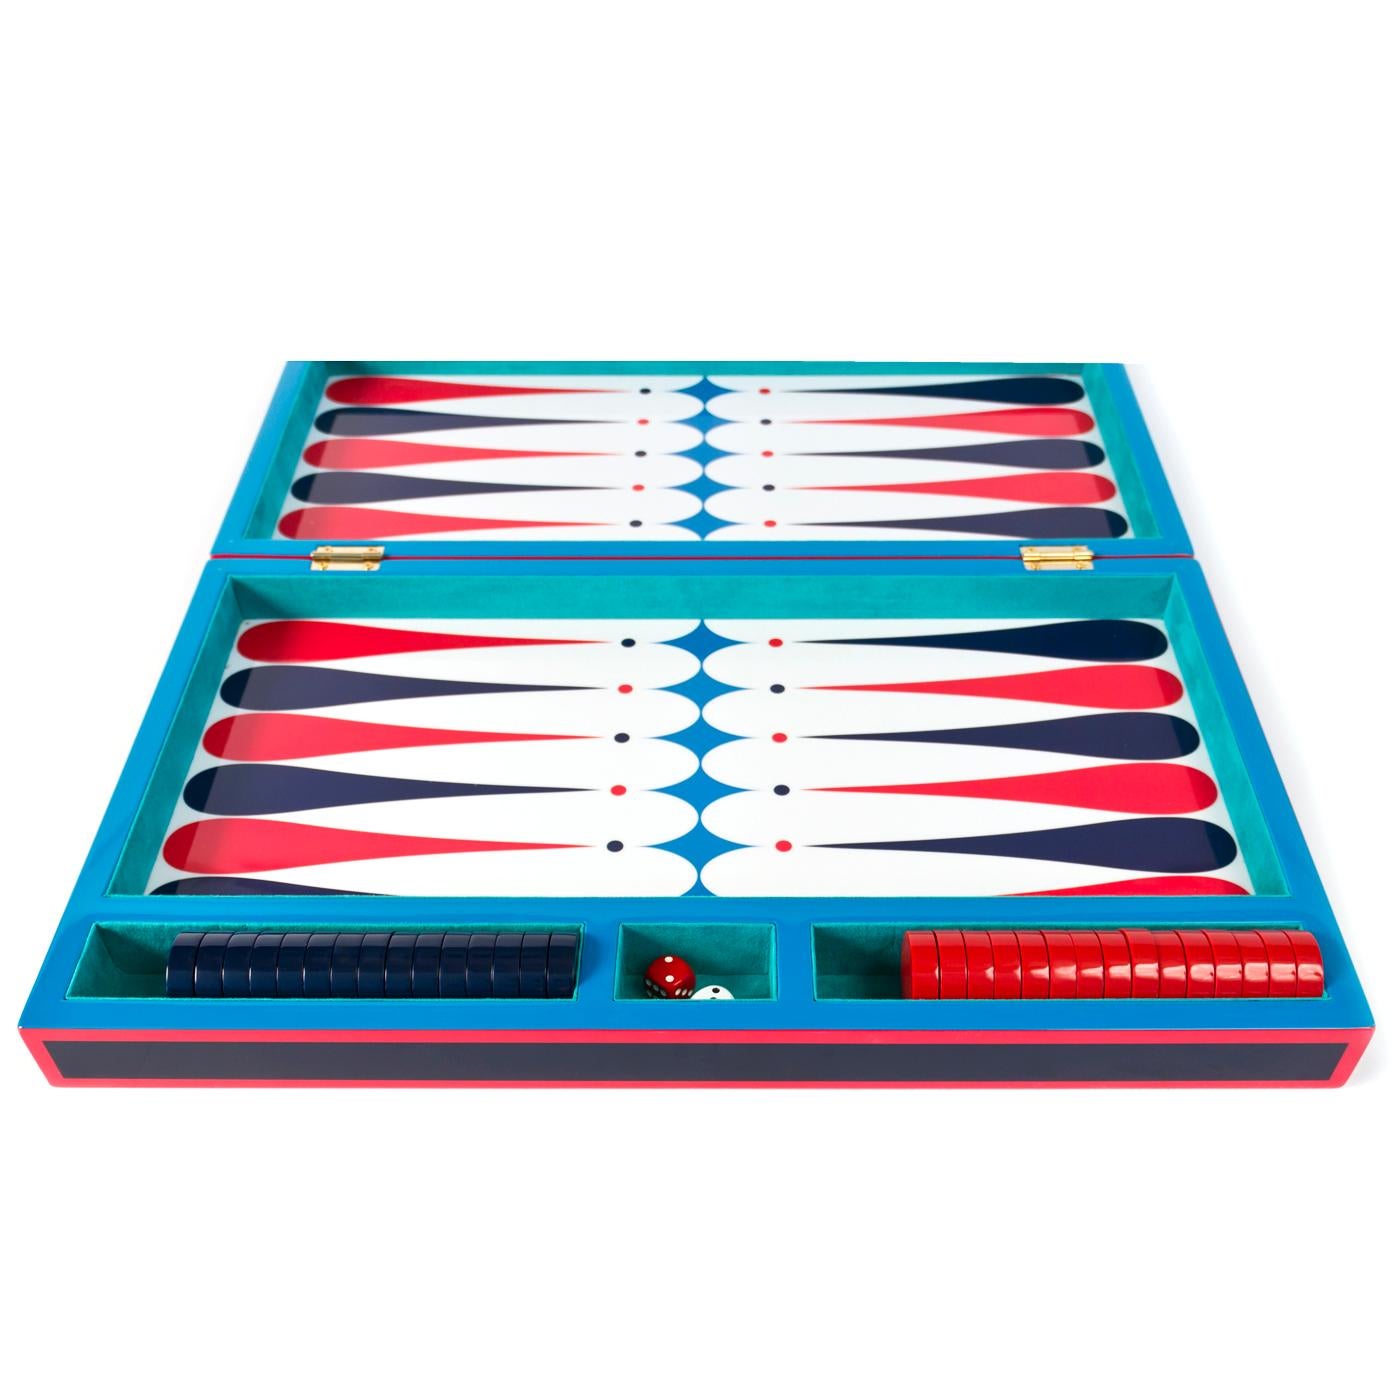 Modern Backgammon Set in Navy and Red Lacquer